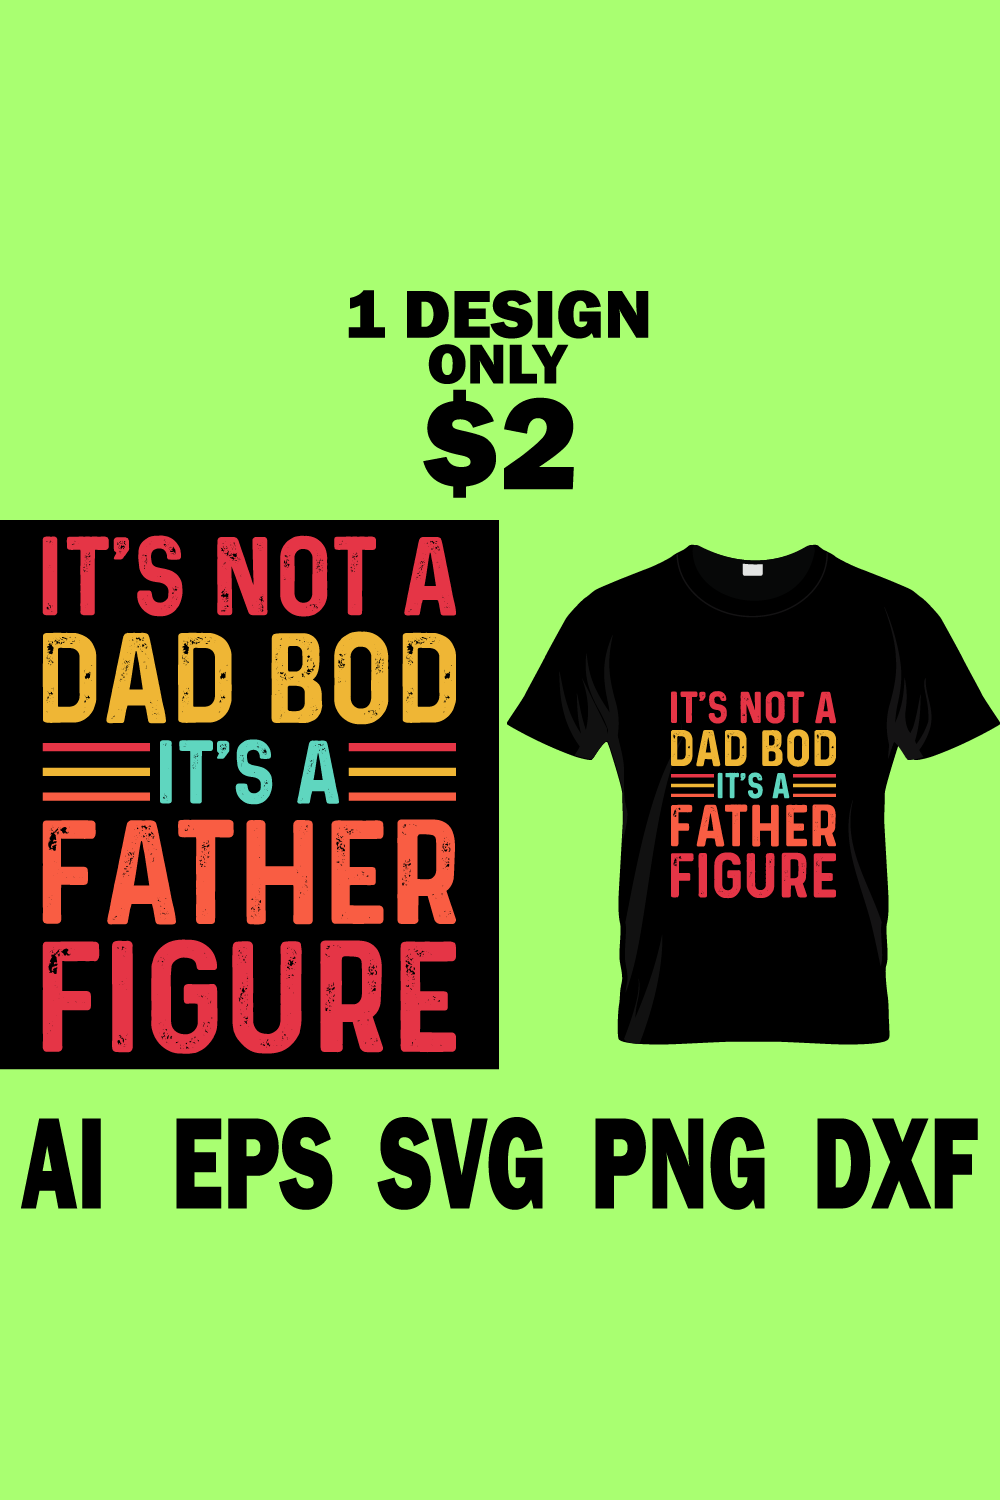 Image of a black T-shirt with a charming inscription It's not a dad bod it's a father figure